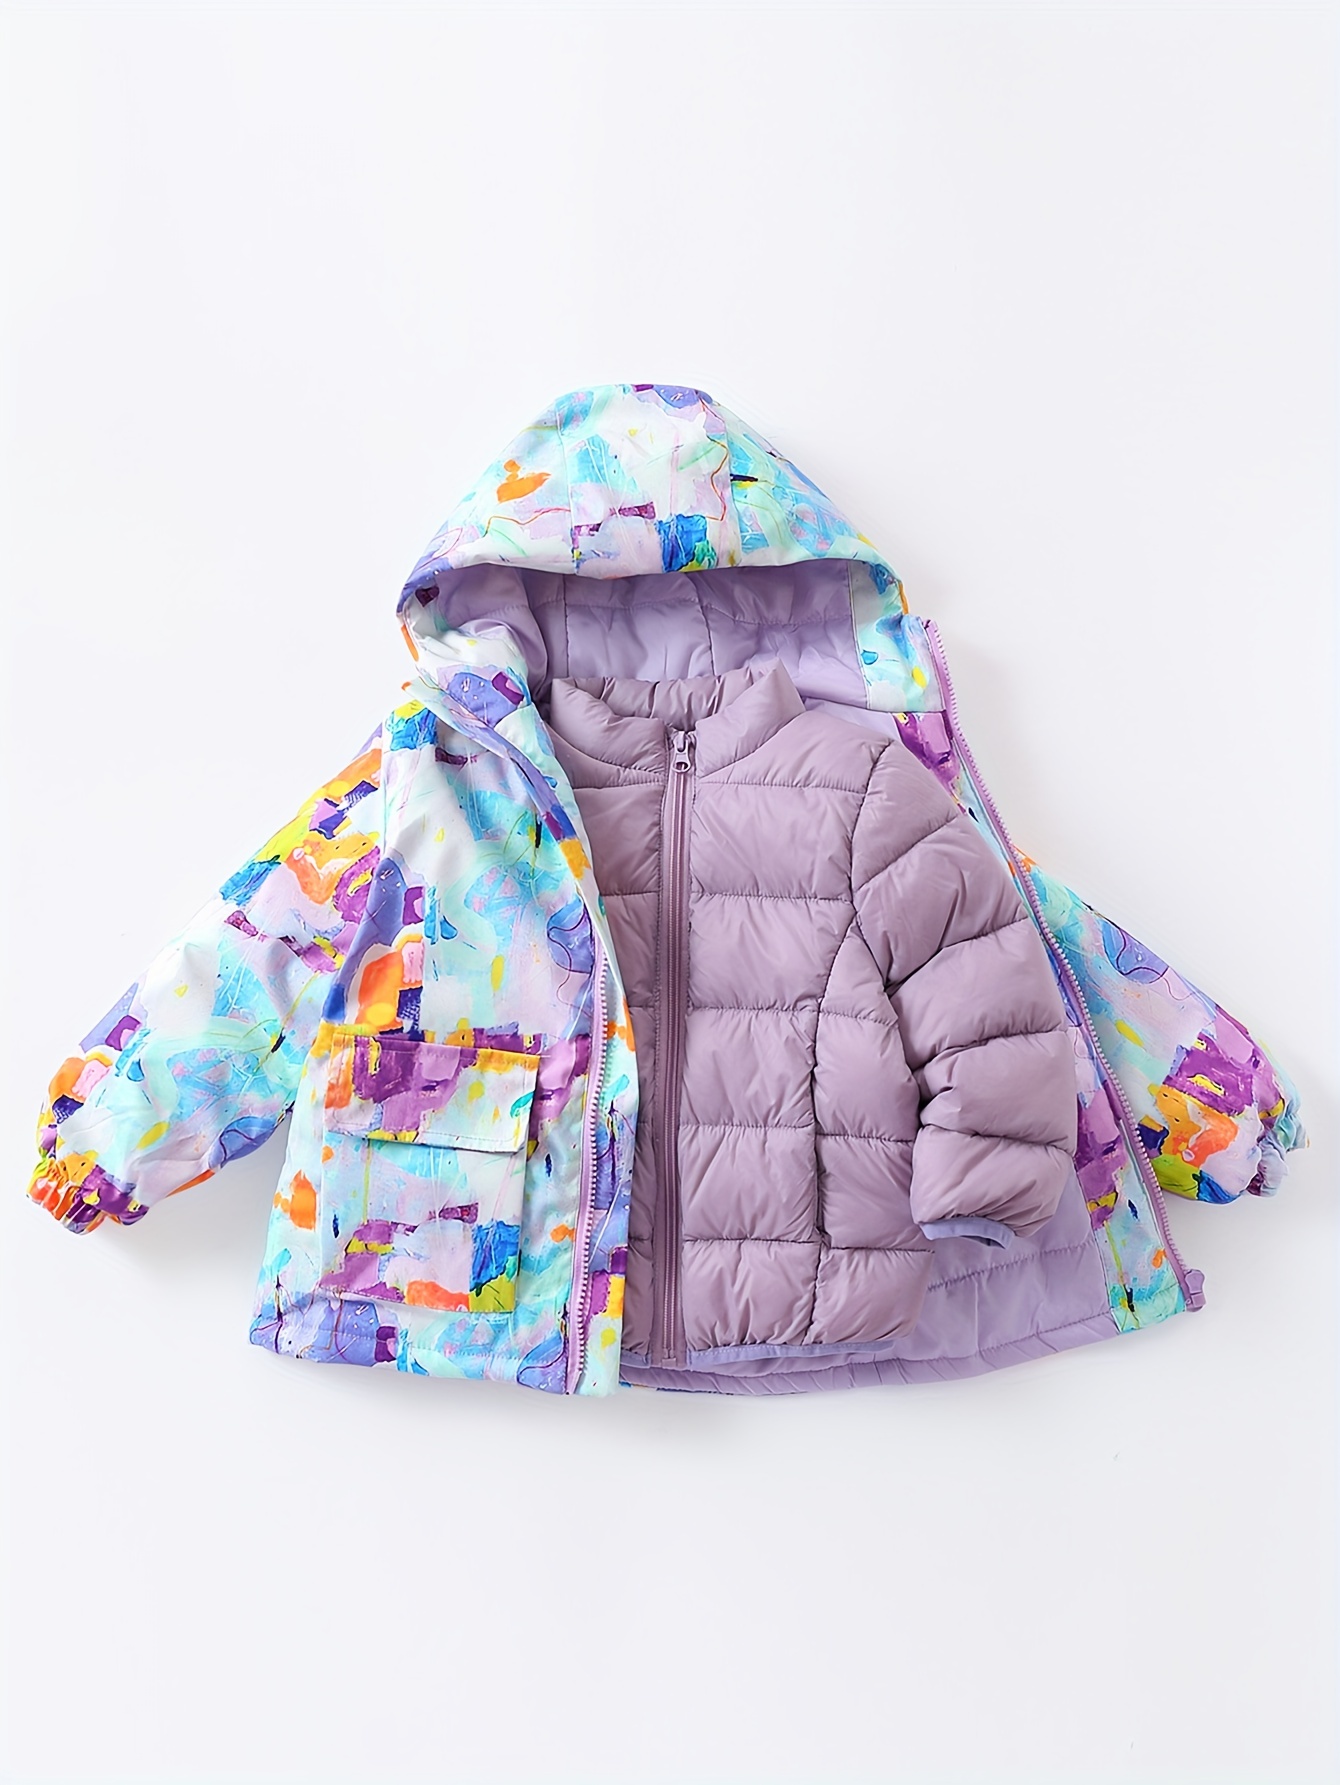 Winter Purple Hooded Cutton Puffer Jacket Down Coat  Purple coat outfit,  Winter jacket outfits, Winter coat outfits